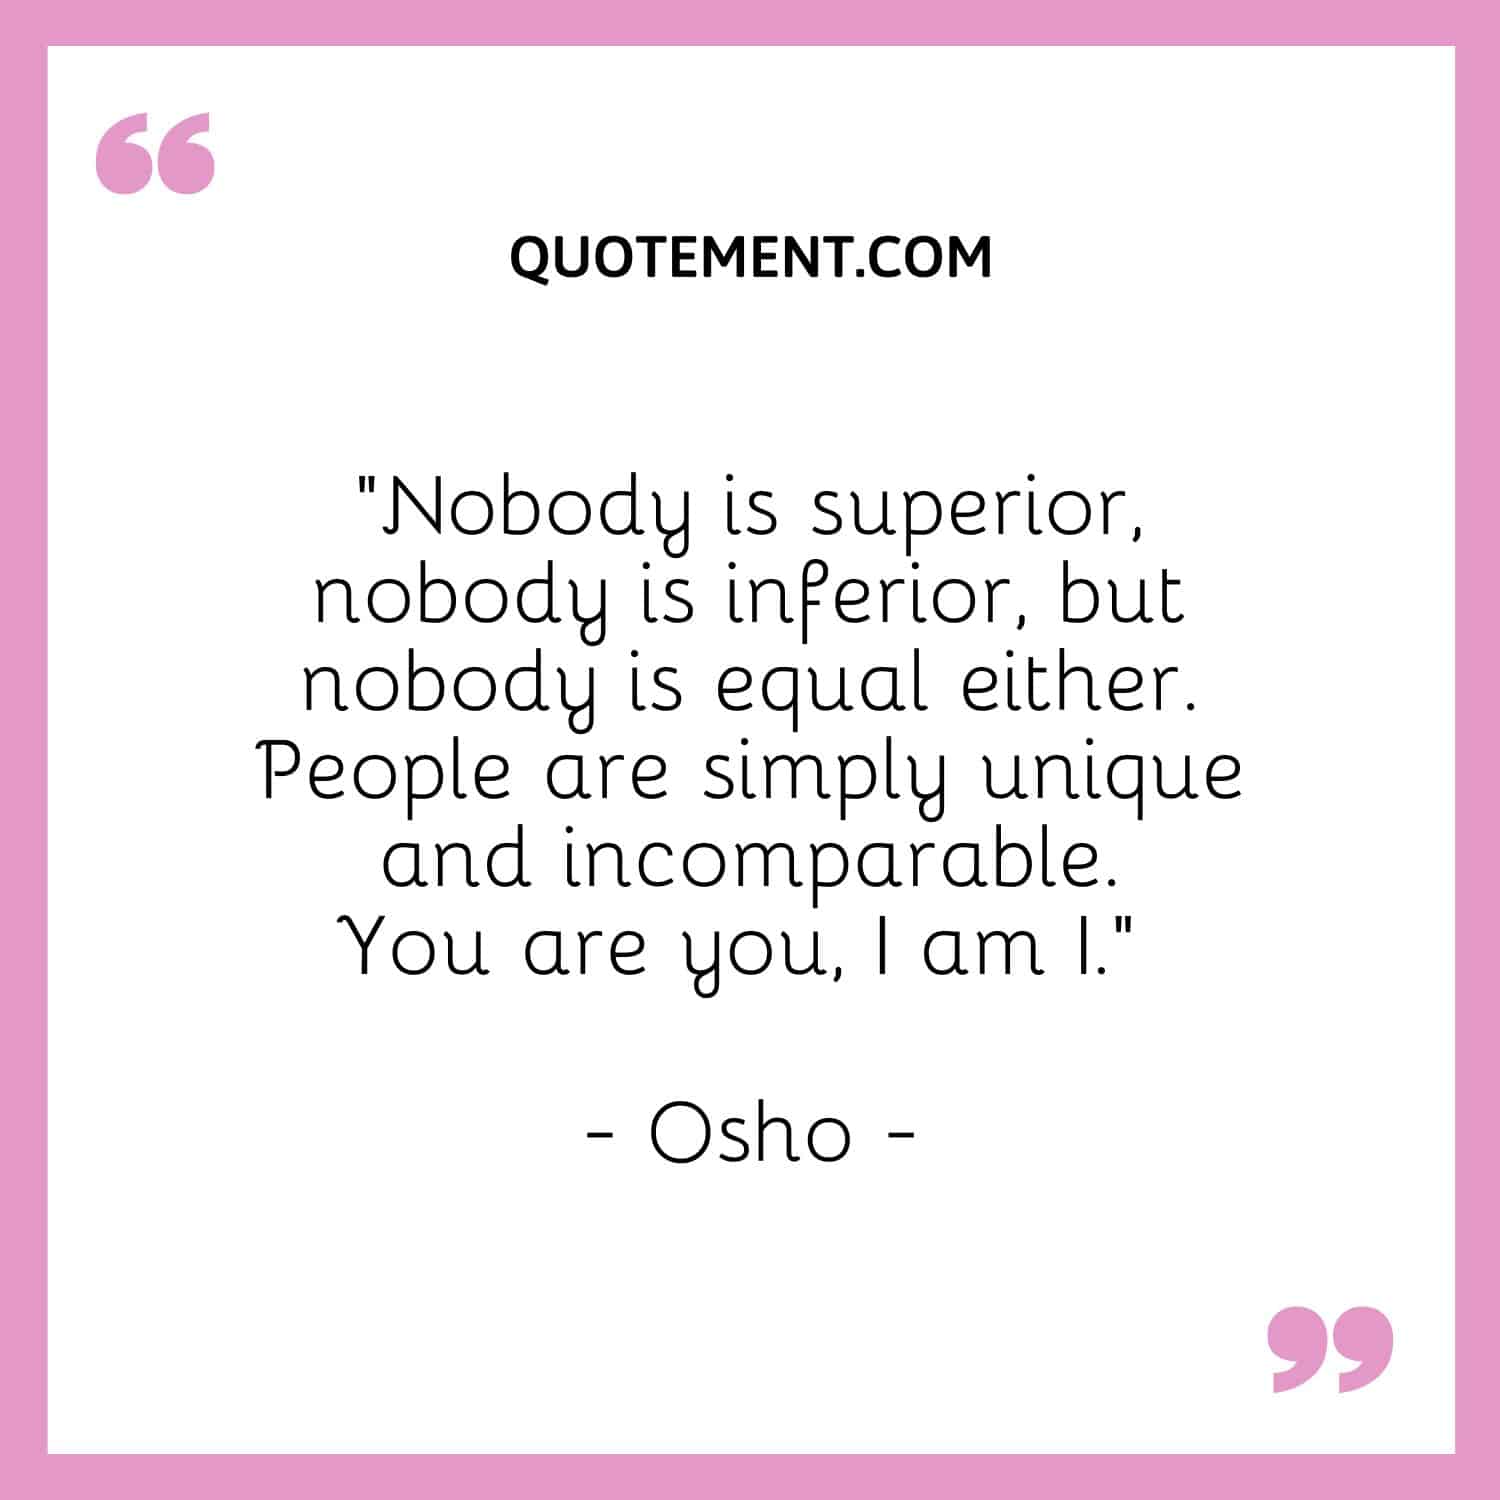 Nobody is superior, nobody is inferior, but nobody is equal either